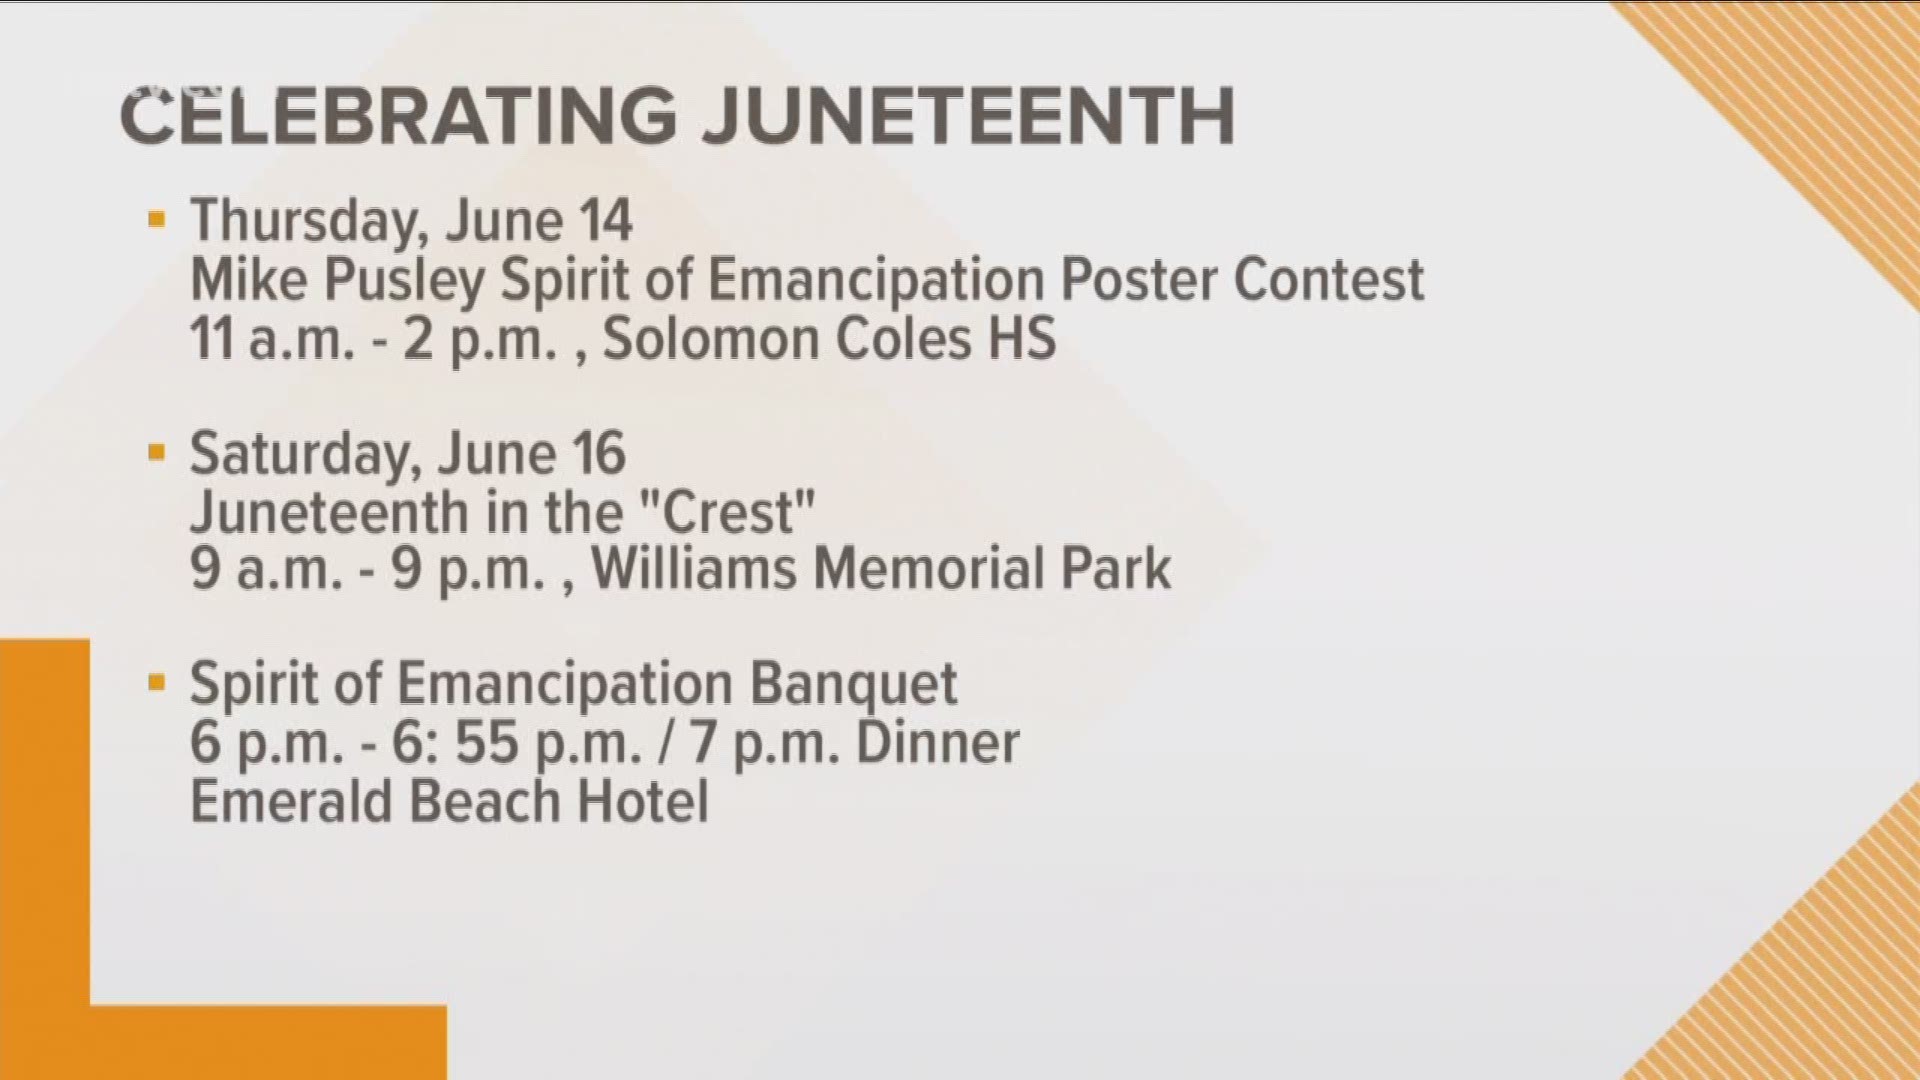 Week long events are being held in celebration of Juneteenth.